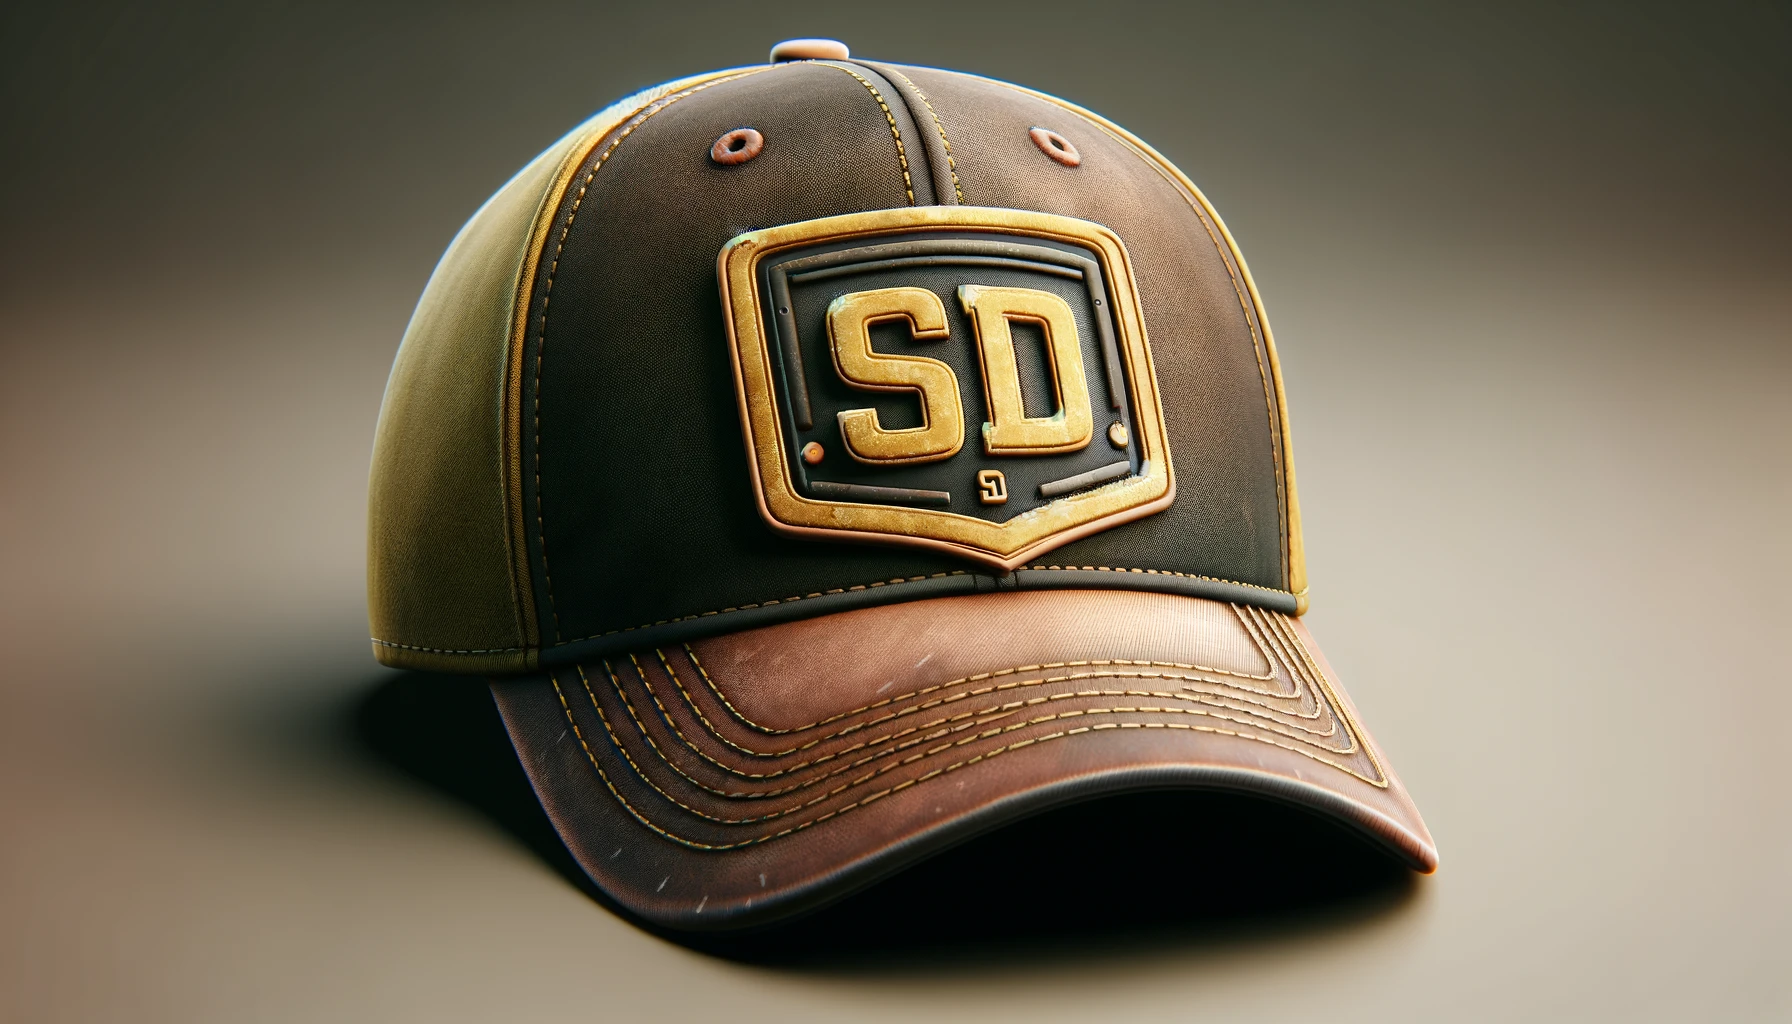 A stylish cap with a large logo in yellow and brown in the center, SD letters included, with the front logo blurred, missing, or not visible. Horizontal aspect ratio (16:9).